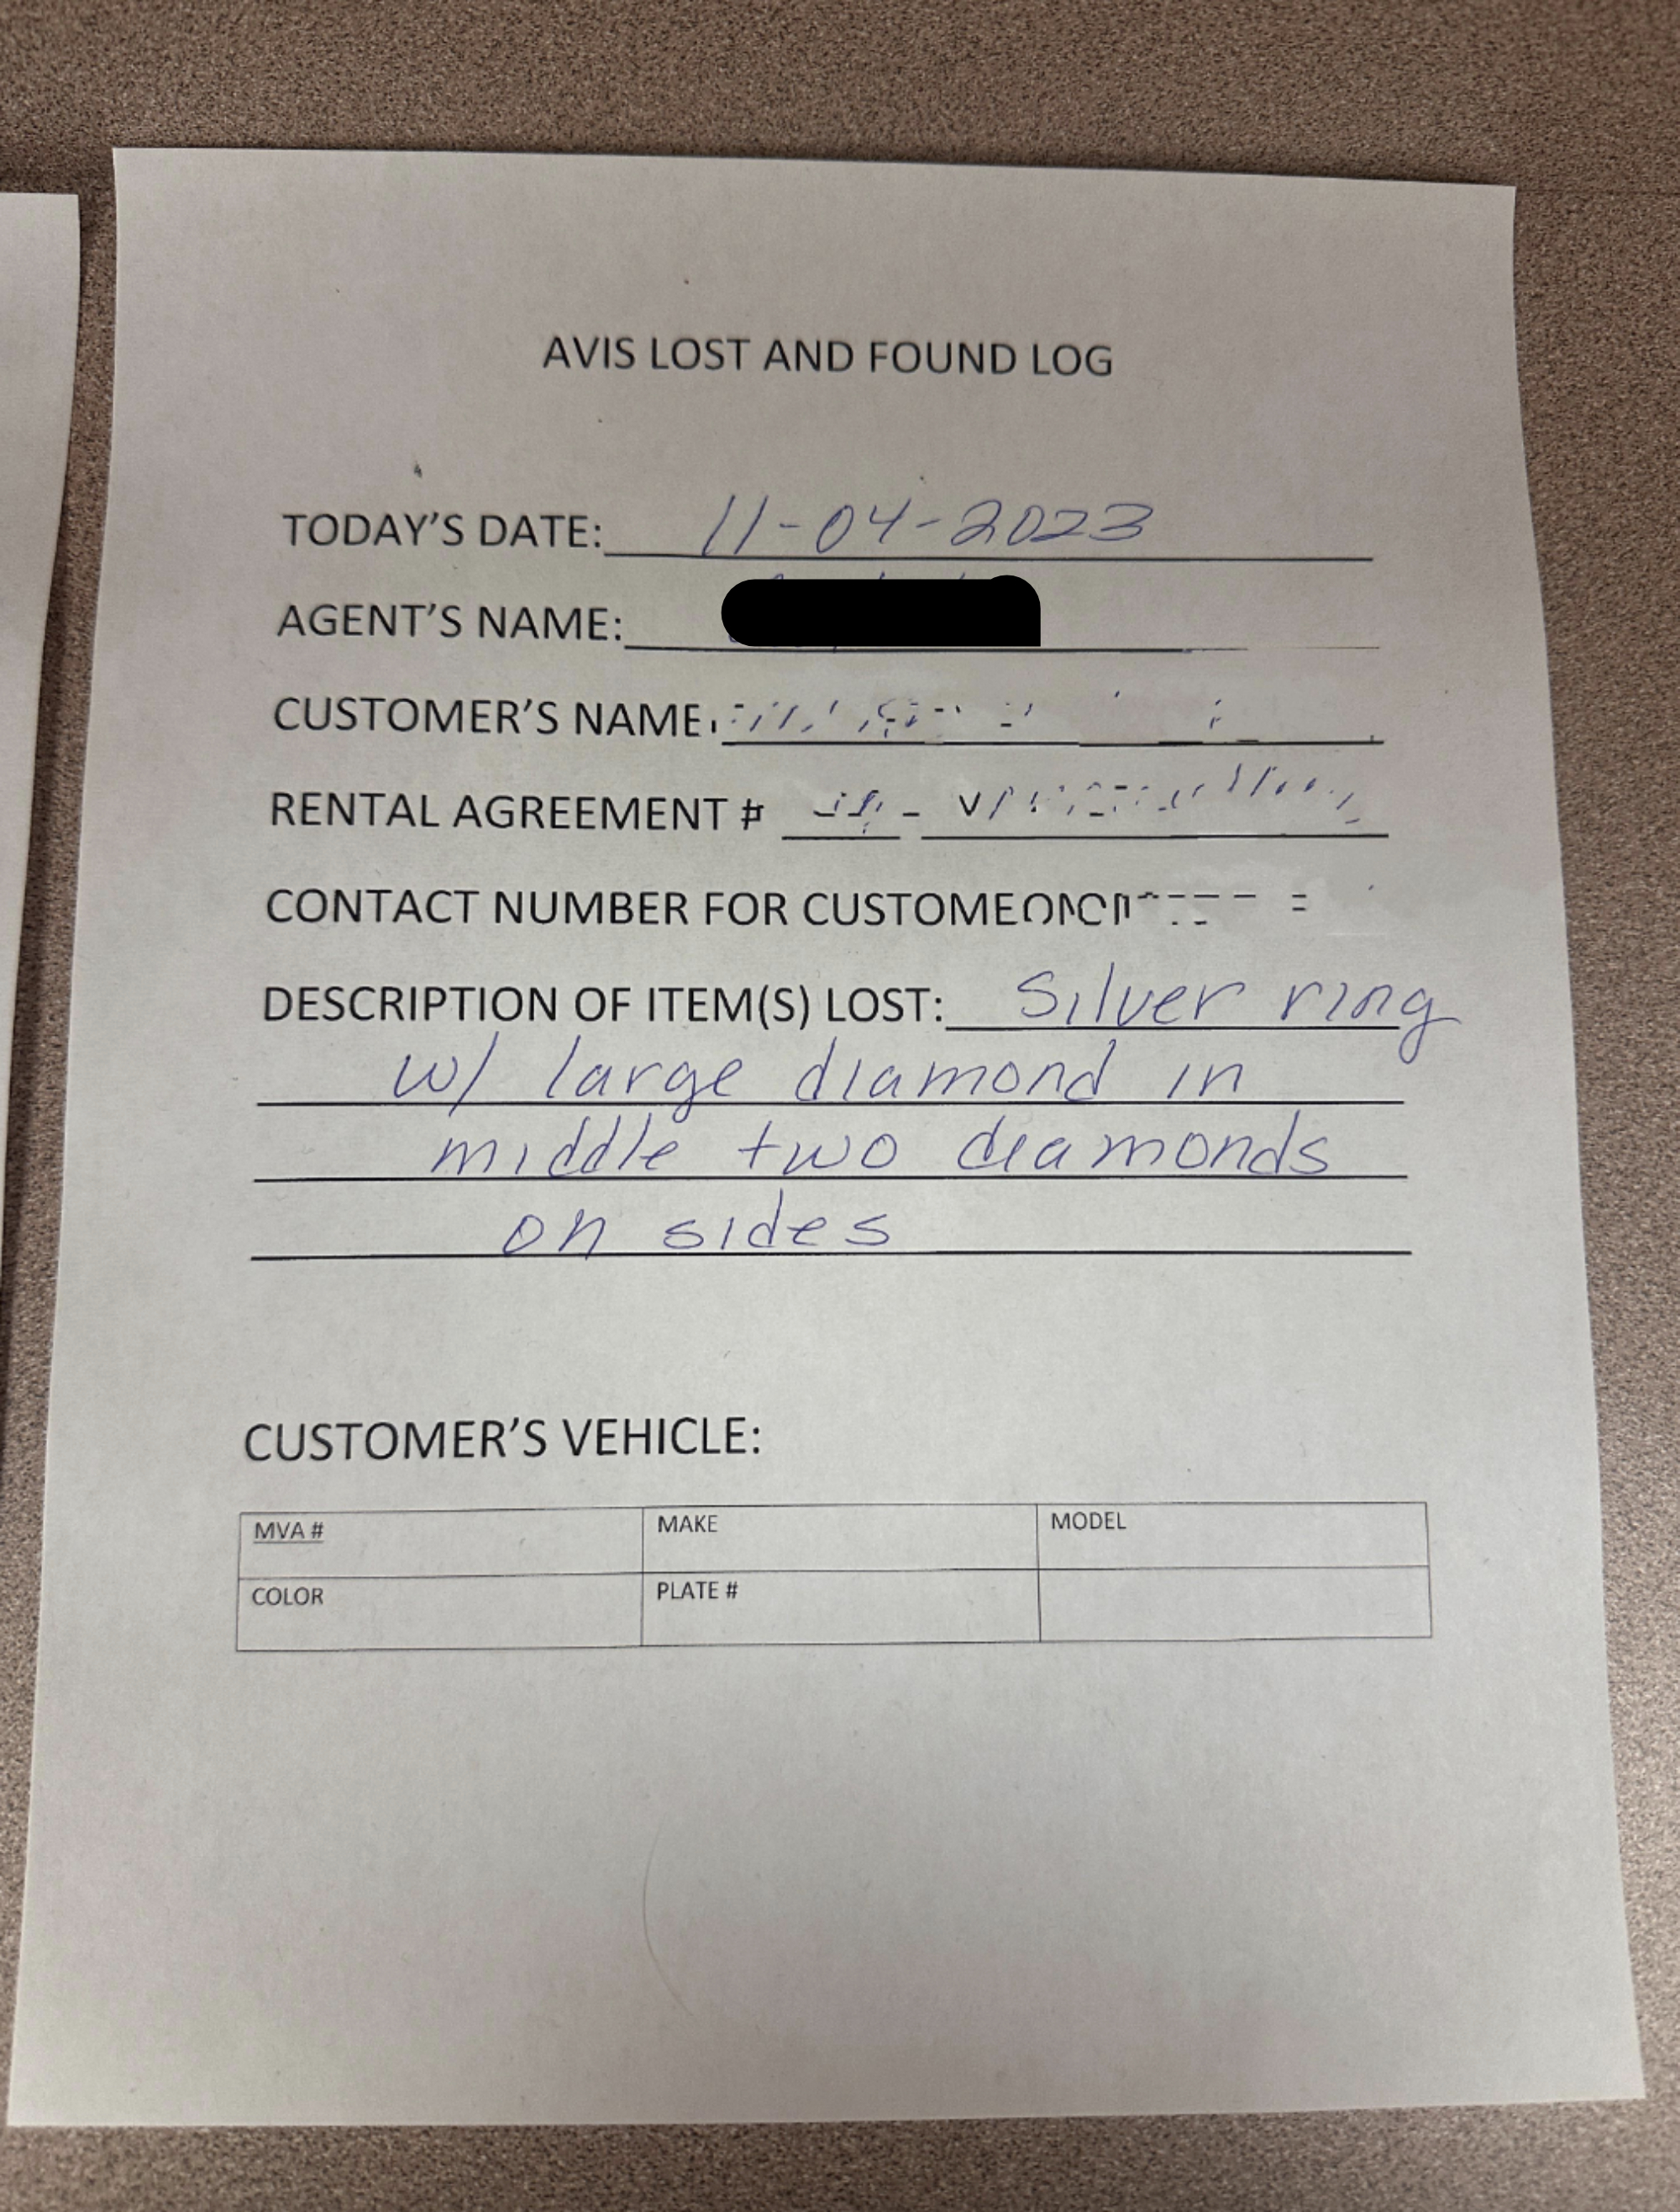 Lost and Found log with entries for date, customer name, rental agreement, and description of a large diamond with silver rings